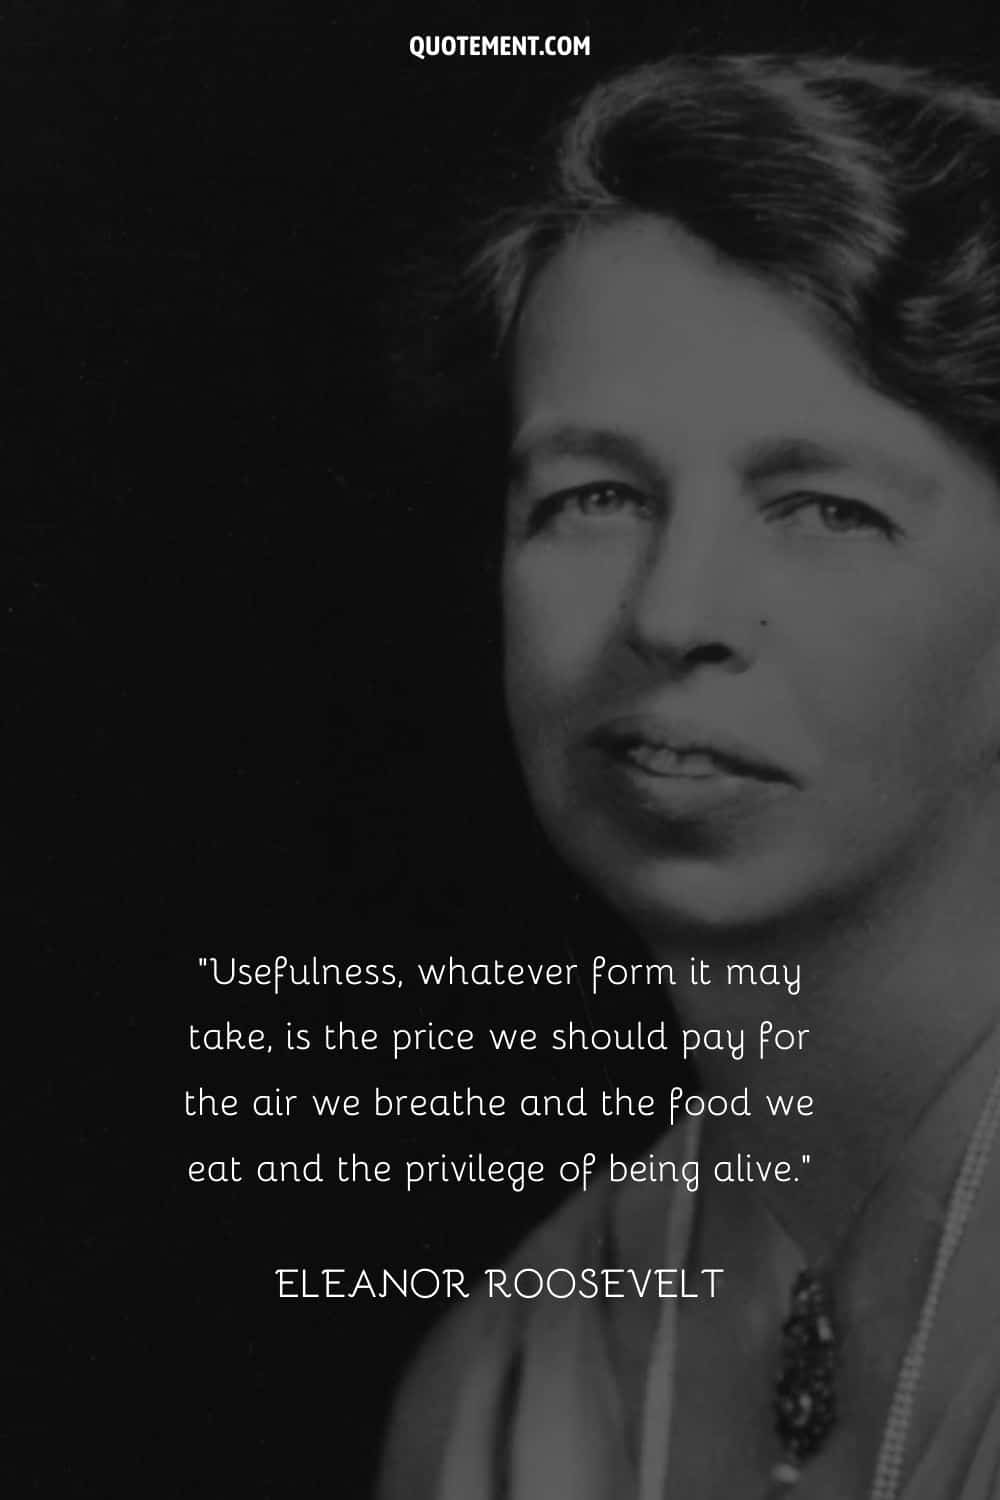 “Usefulness, whatever form it may take, is the price we should pay for the air we breathe and the food we eat and the privilege of being alive.” — Eleanor Roosevelt